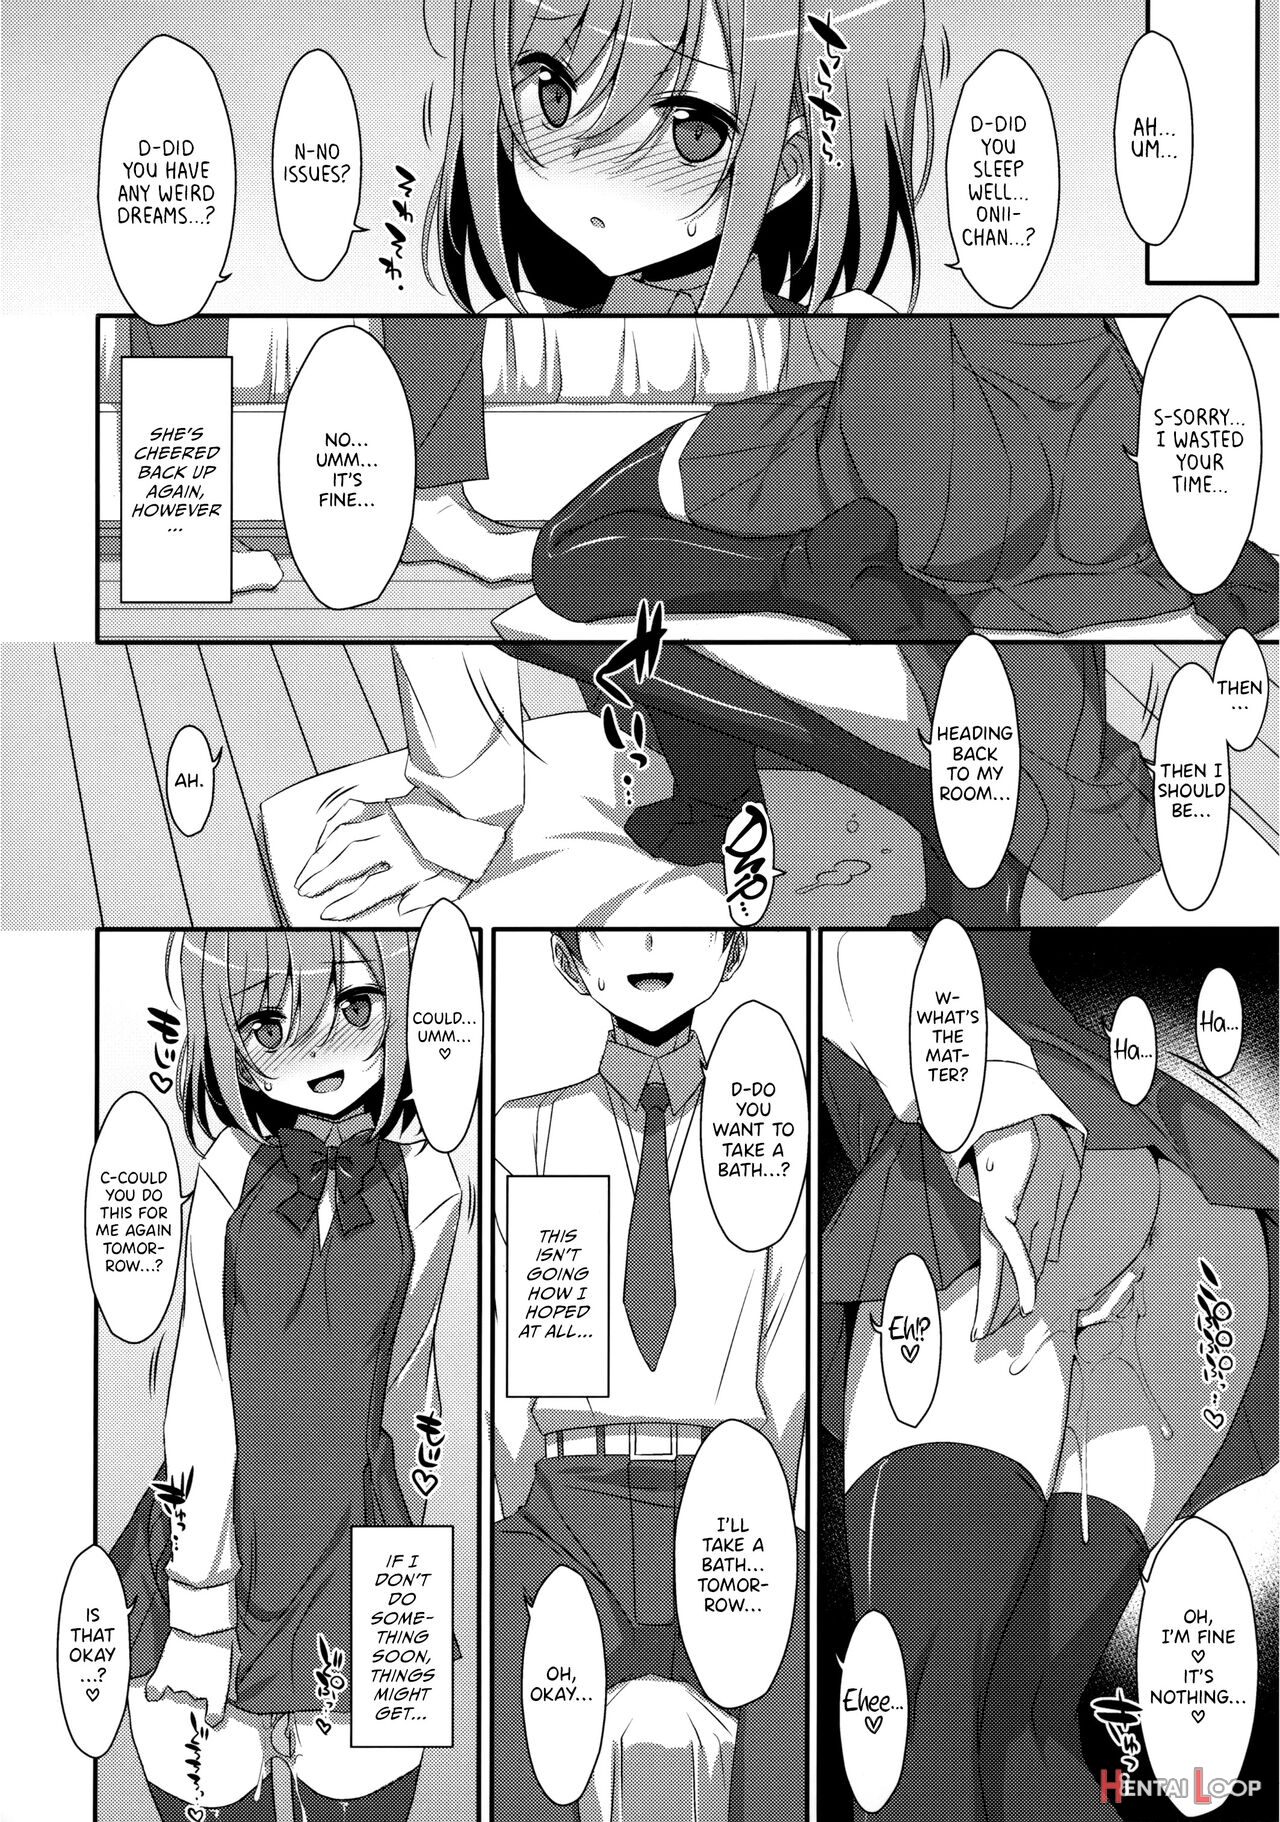 I Want To Do Lots Of Things With My Sleeping Onii-chan! page 22